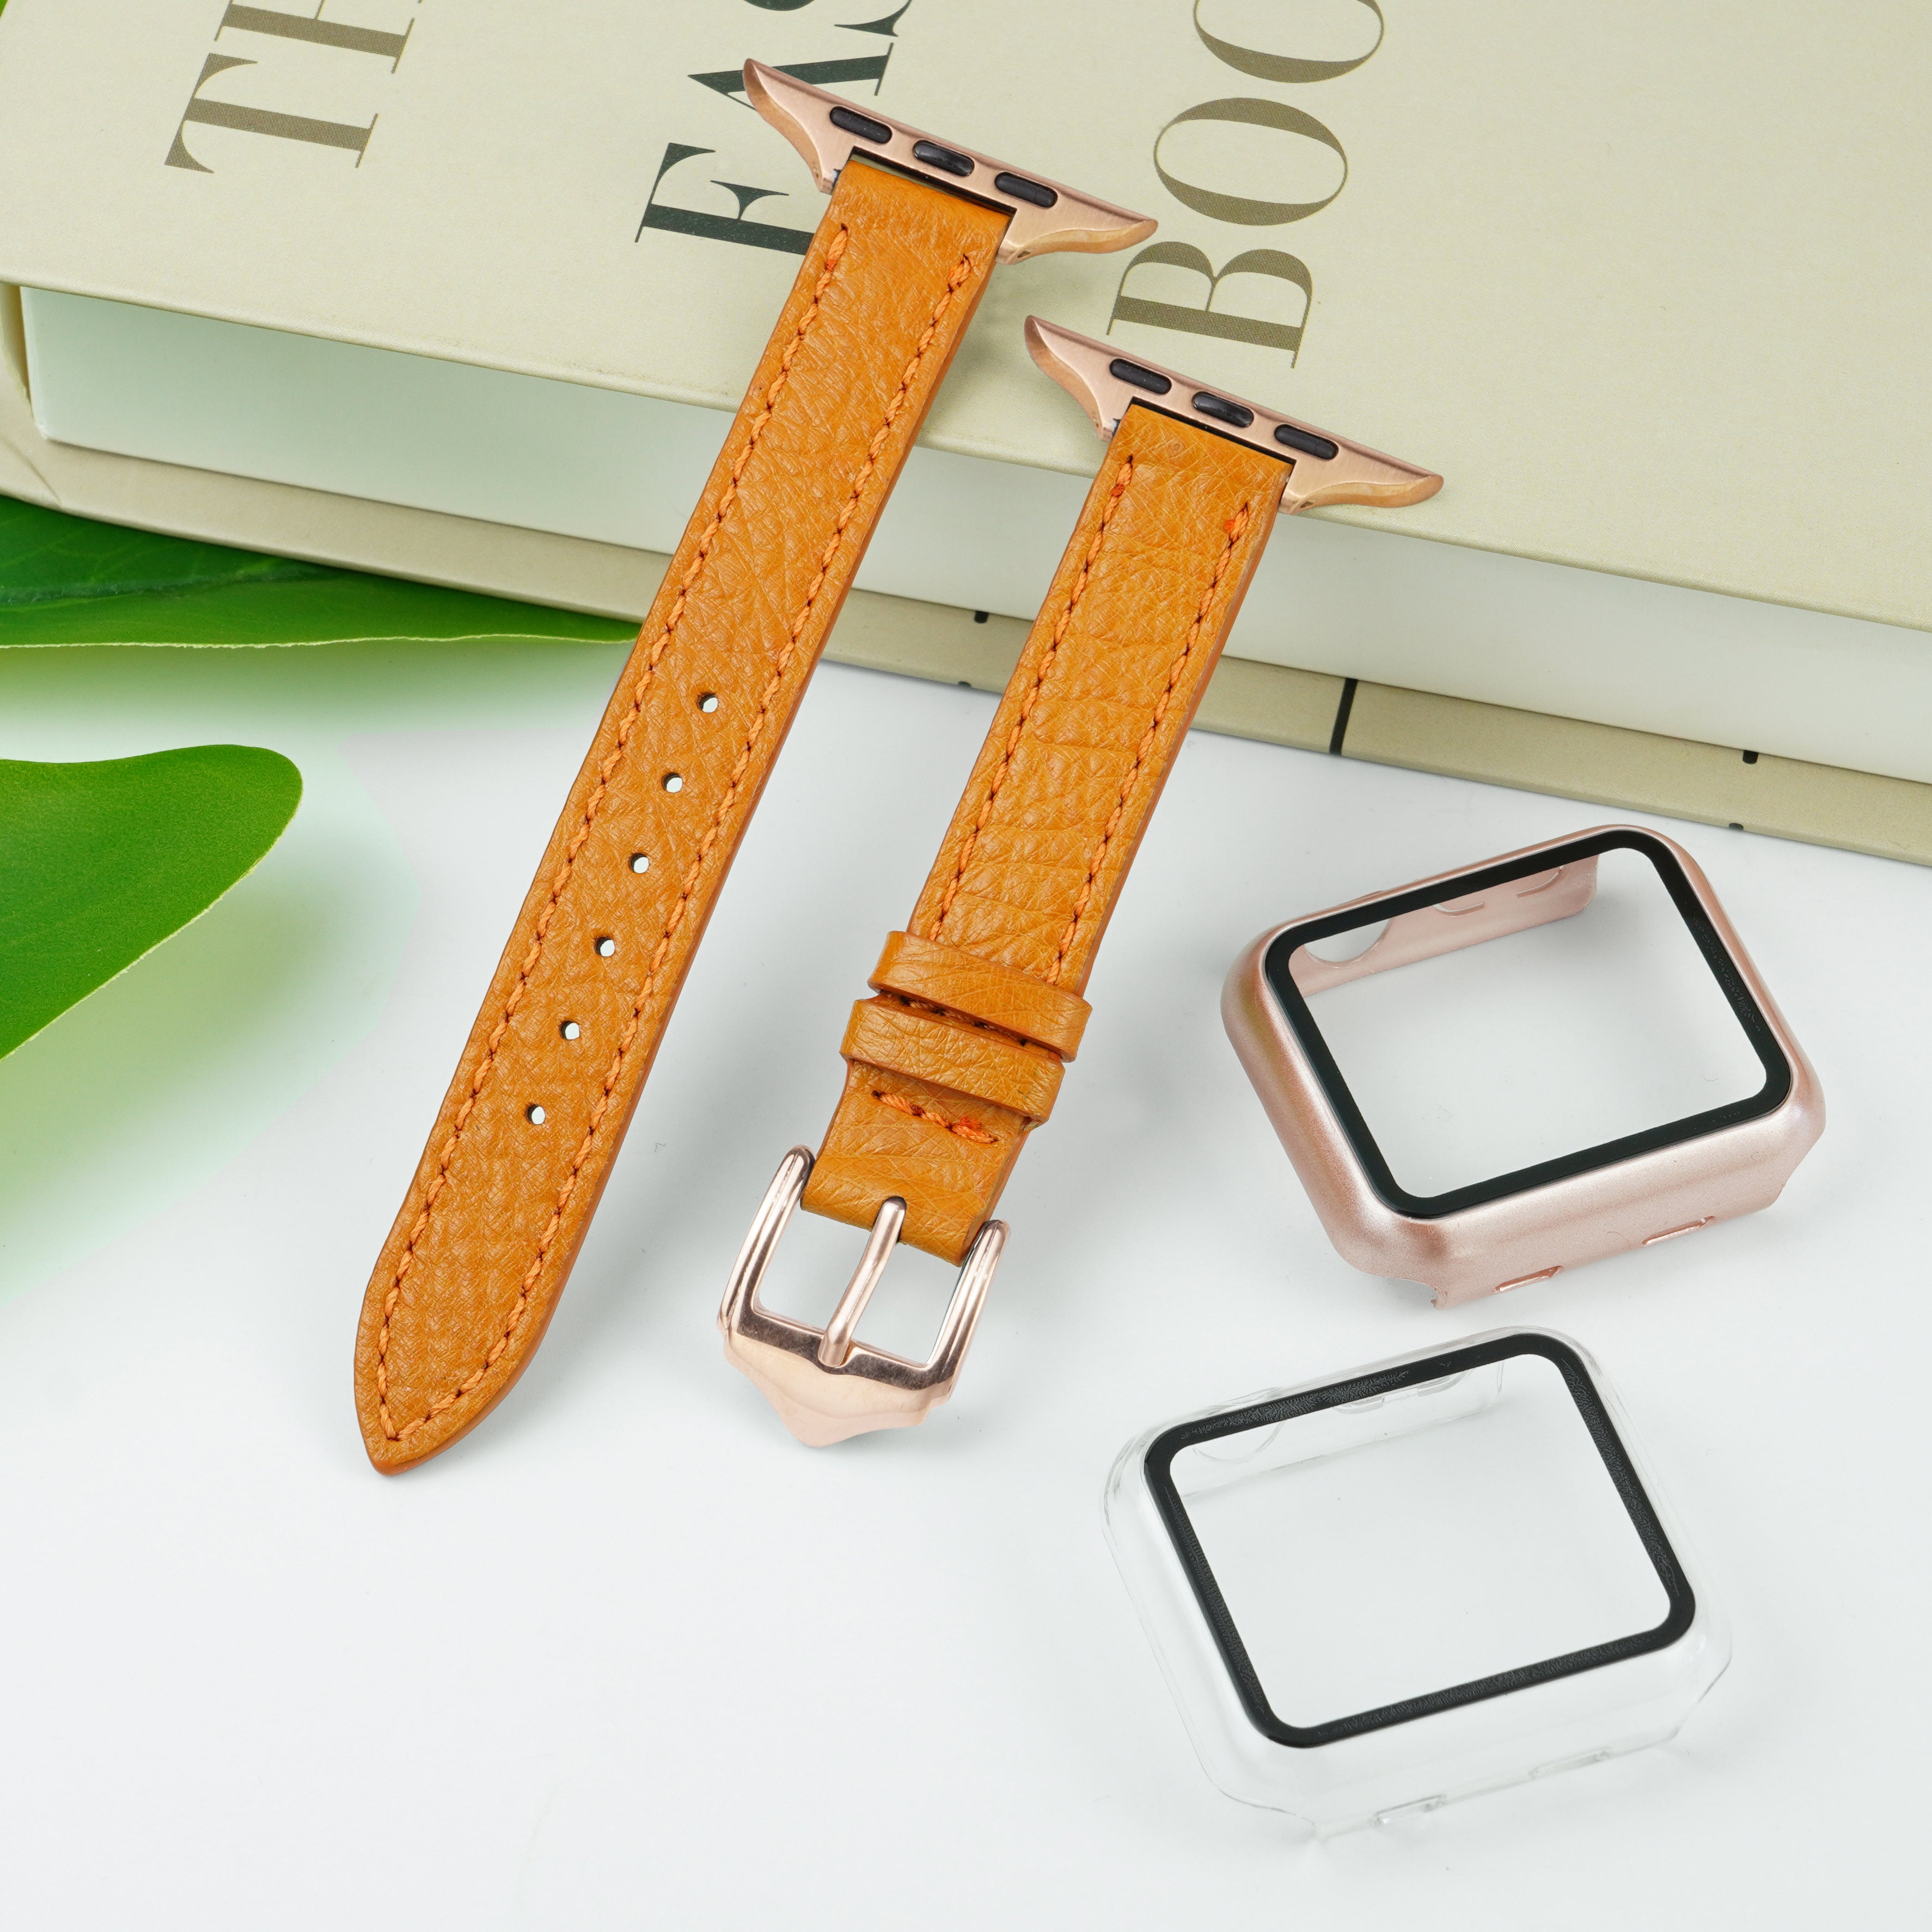 Tan Flat Ostrich Leather Band Compatible Apple Watch Iwatch 38mm Screen Protector Case Gold Adapter Replacement Strap For Smartwatch Series 1 2 3 Leather Handmade AW-182G-W-38MM